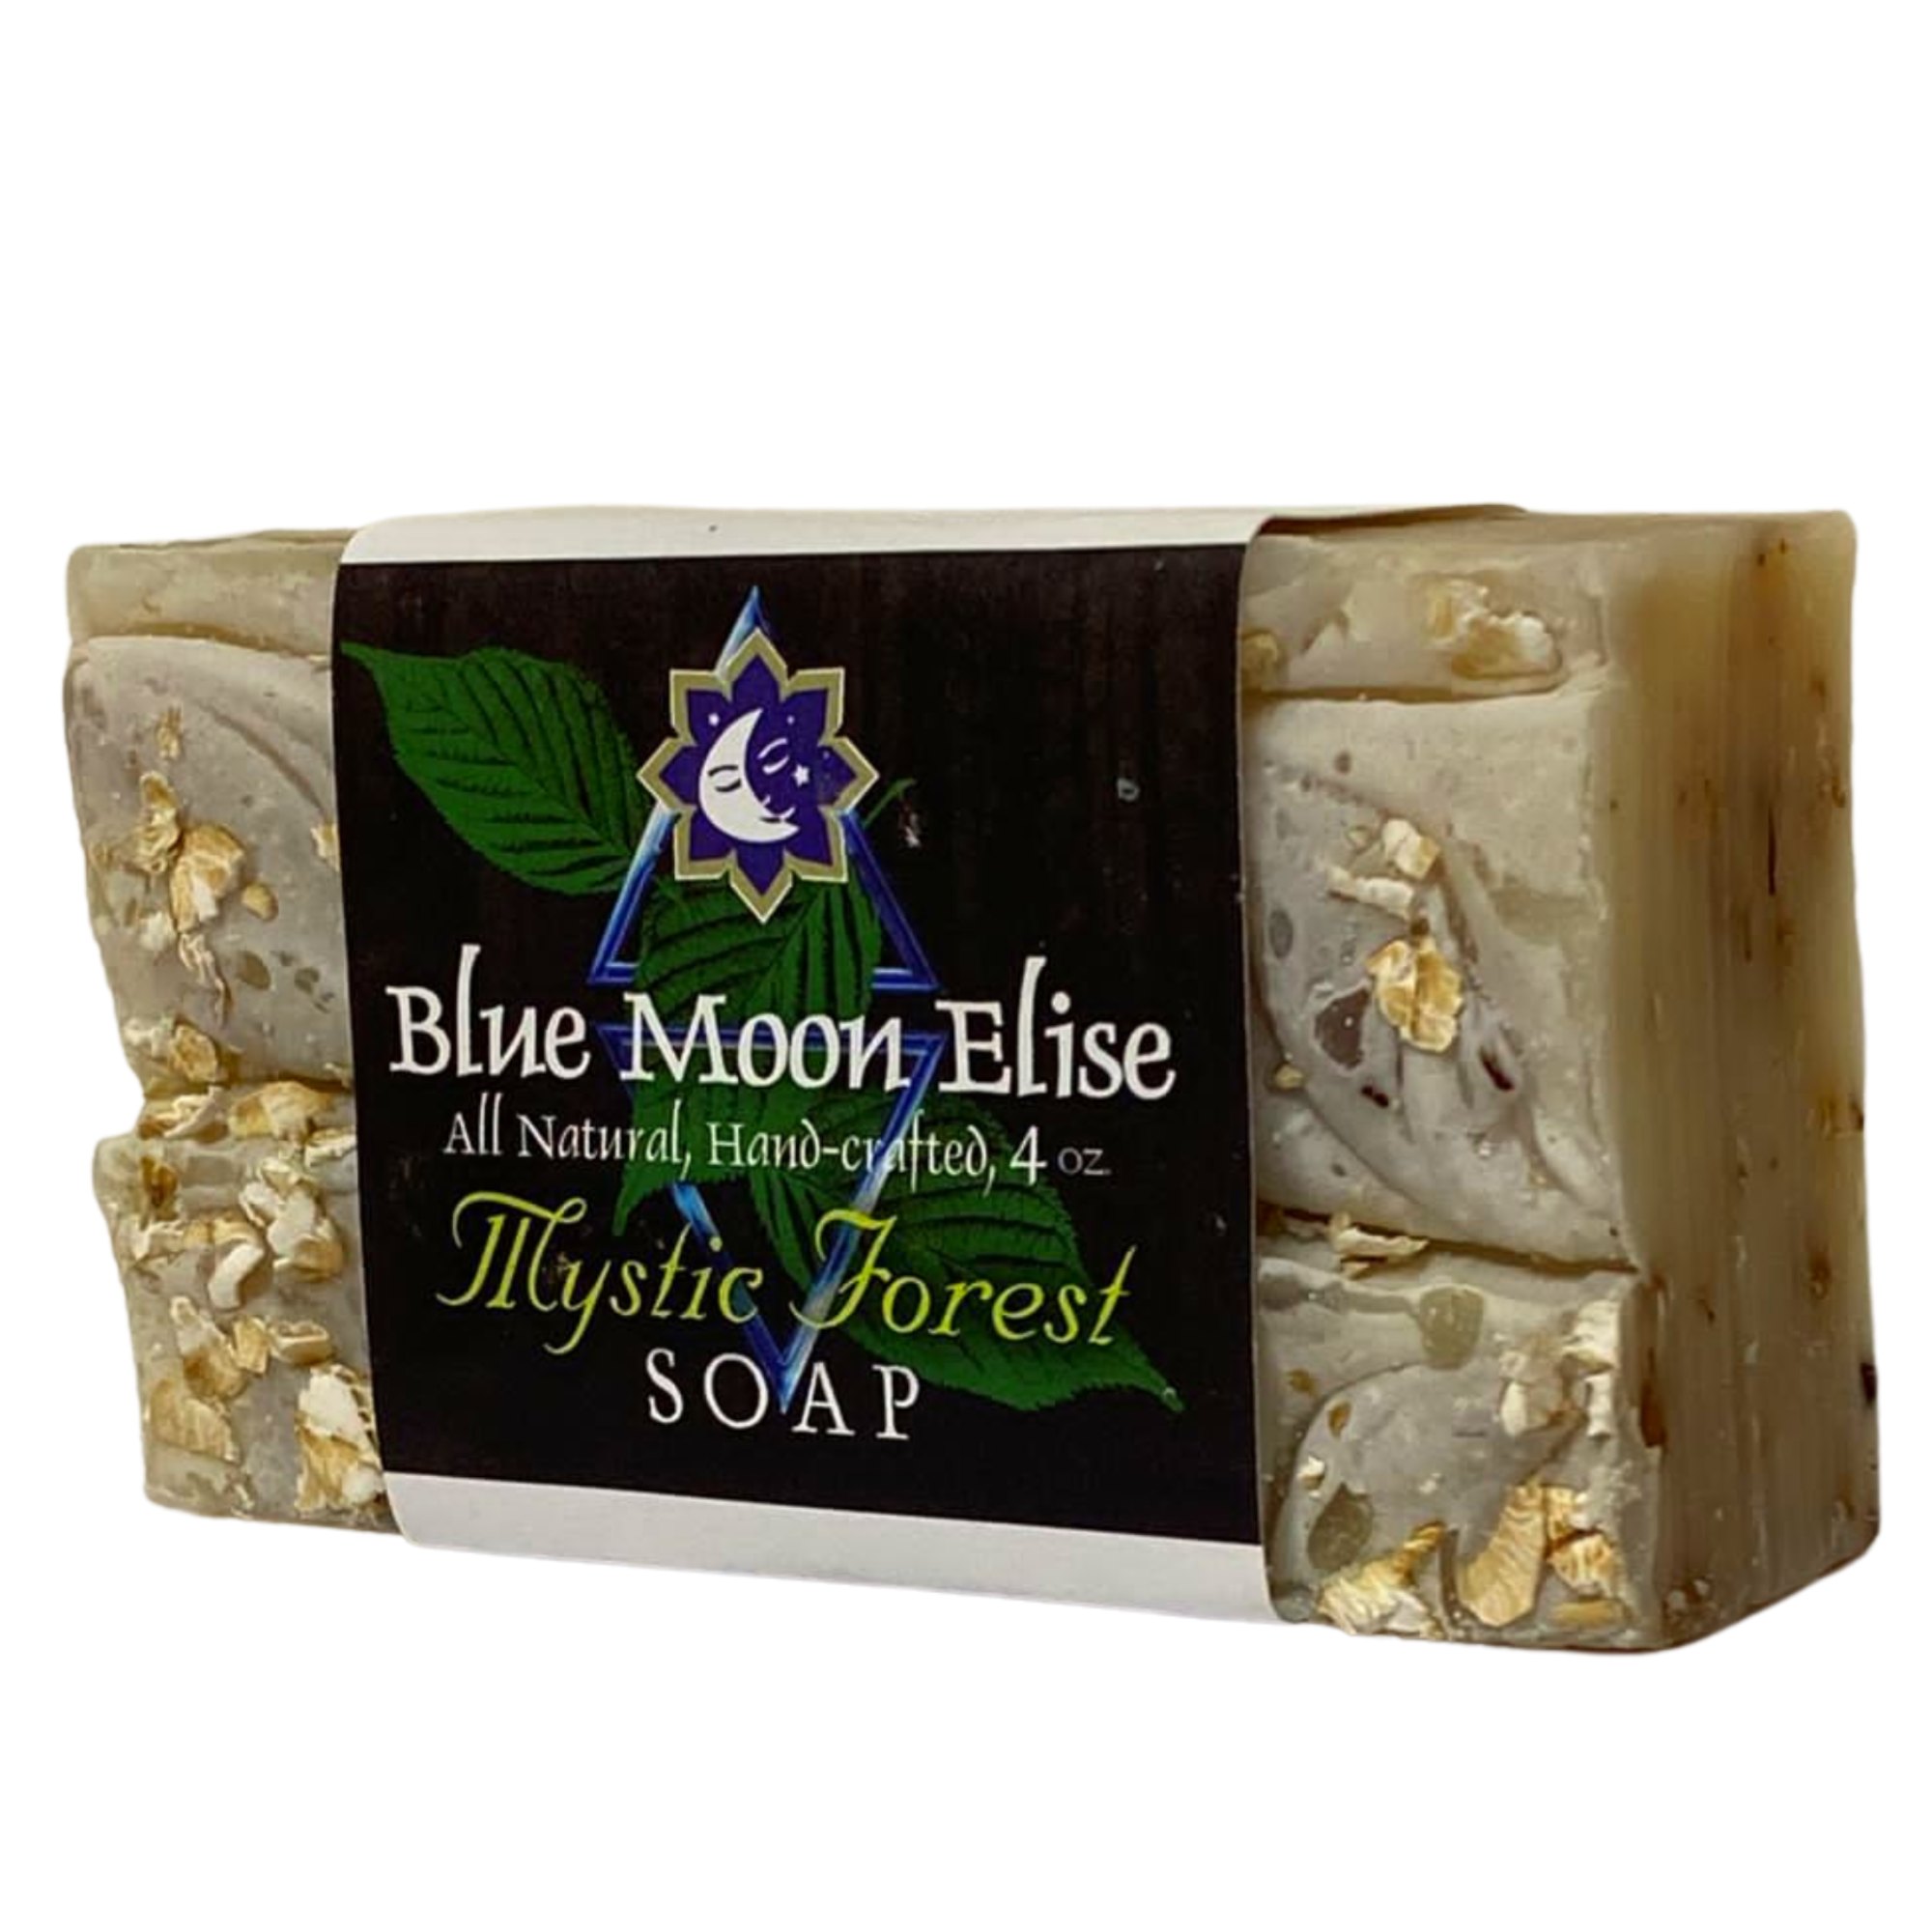 Mystic Forest Soap (Buy 1, Add 2 More for FREE)